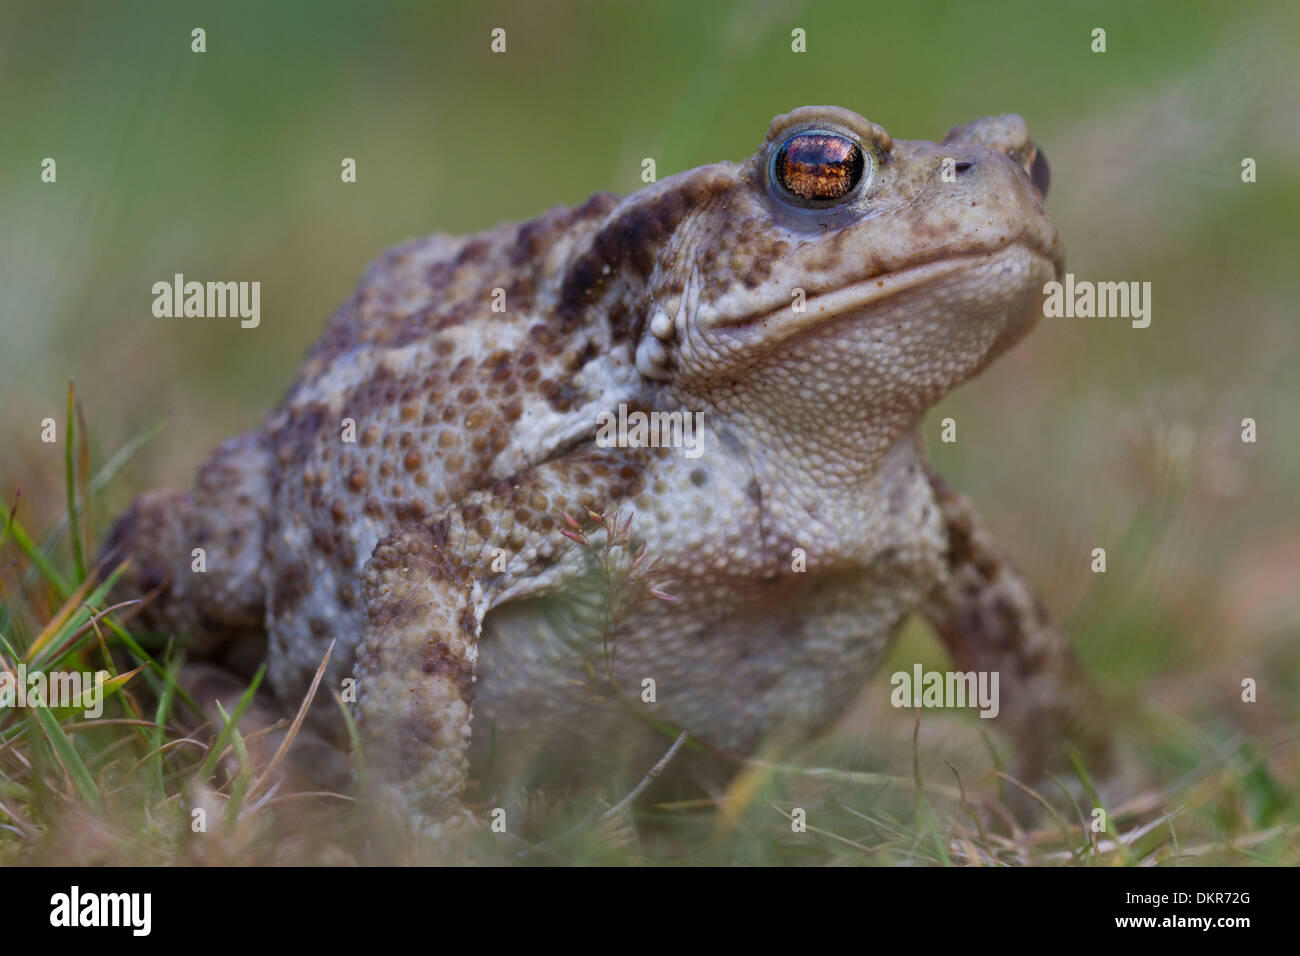 Common Toad (Bufo bufo) adult. Powys, Wales. July. Stock Photo